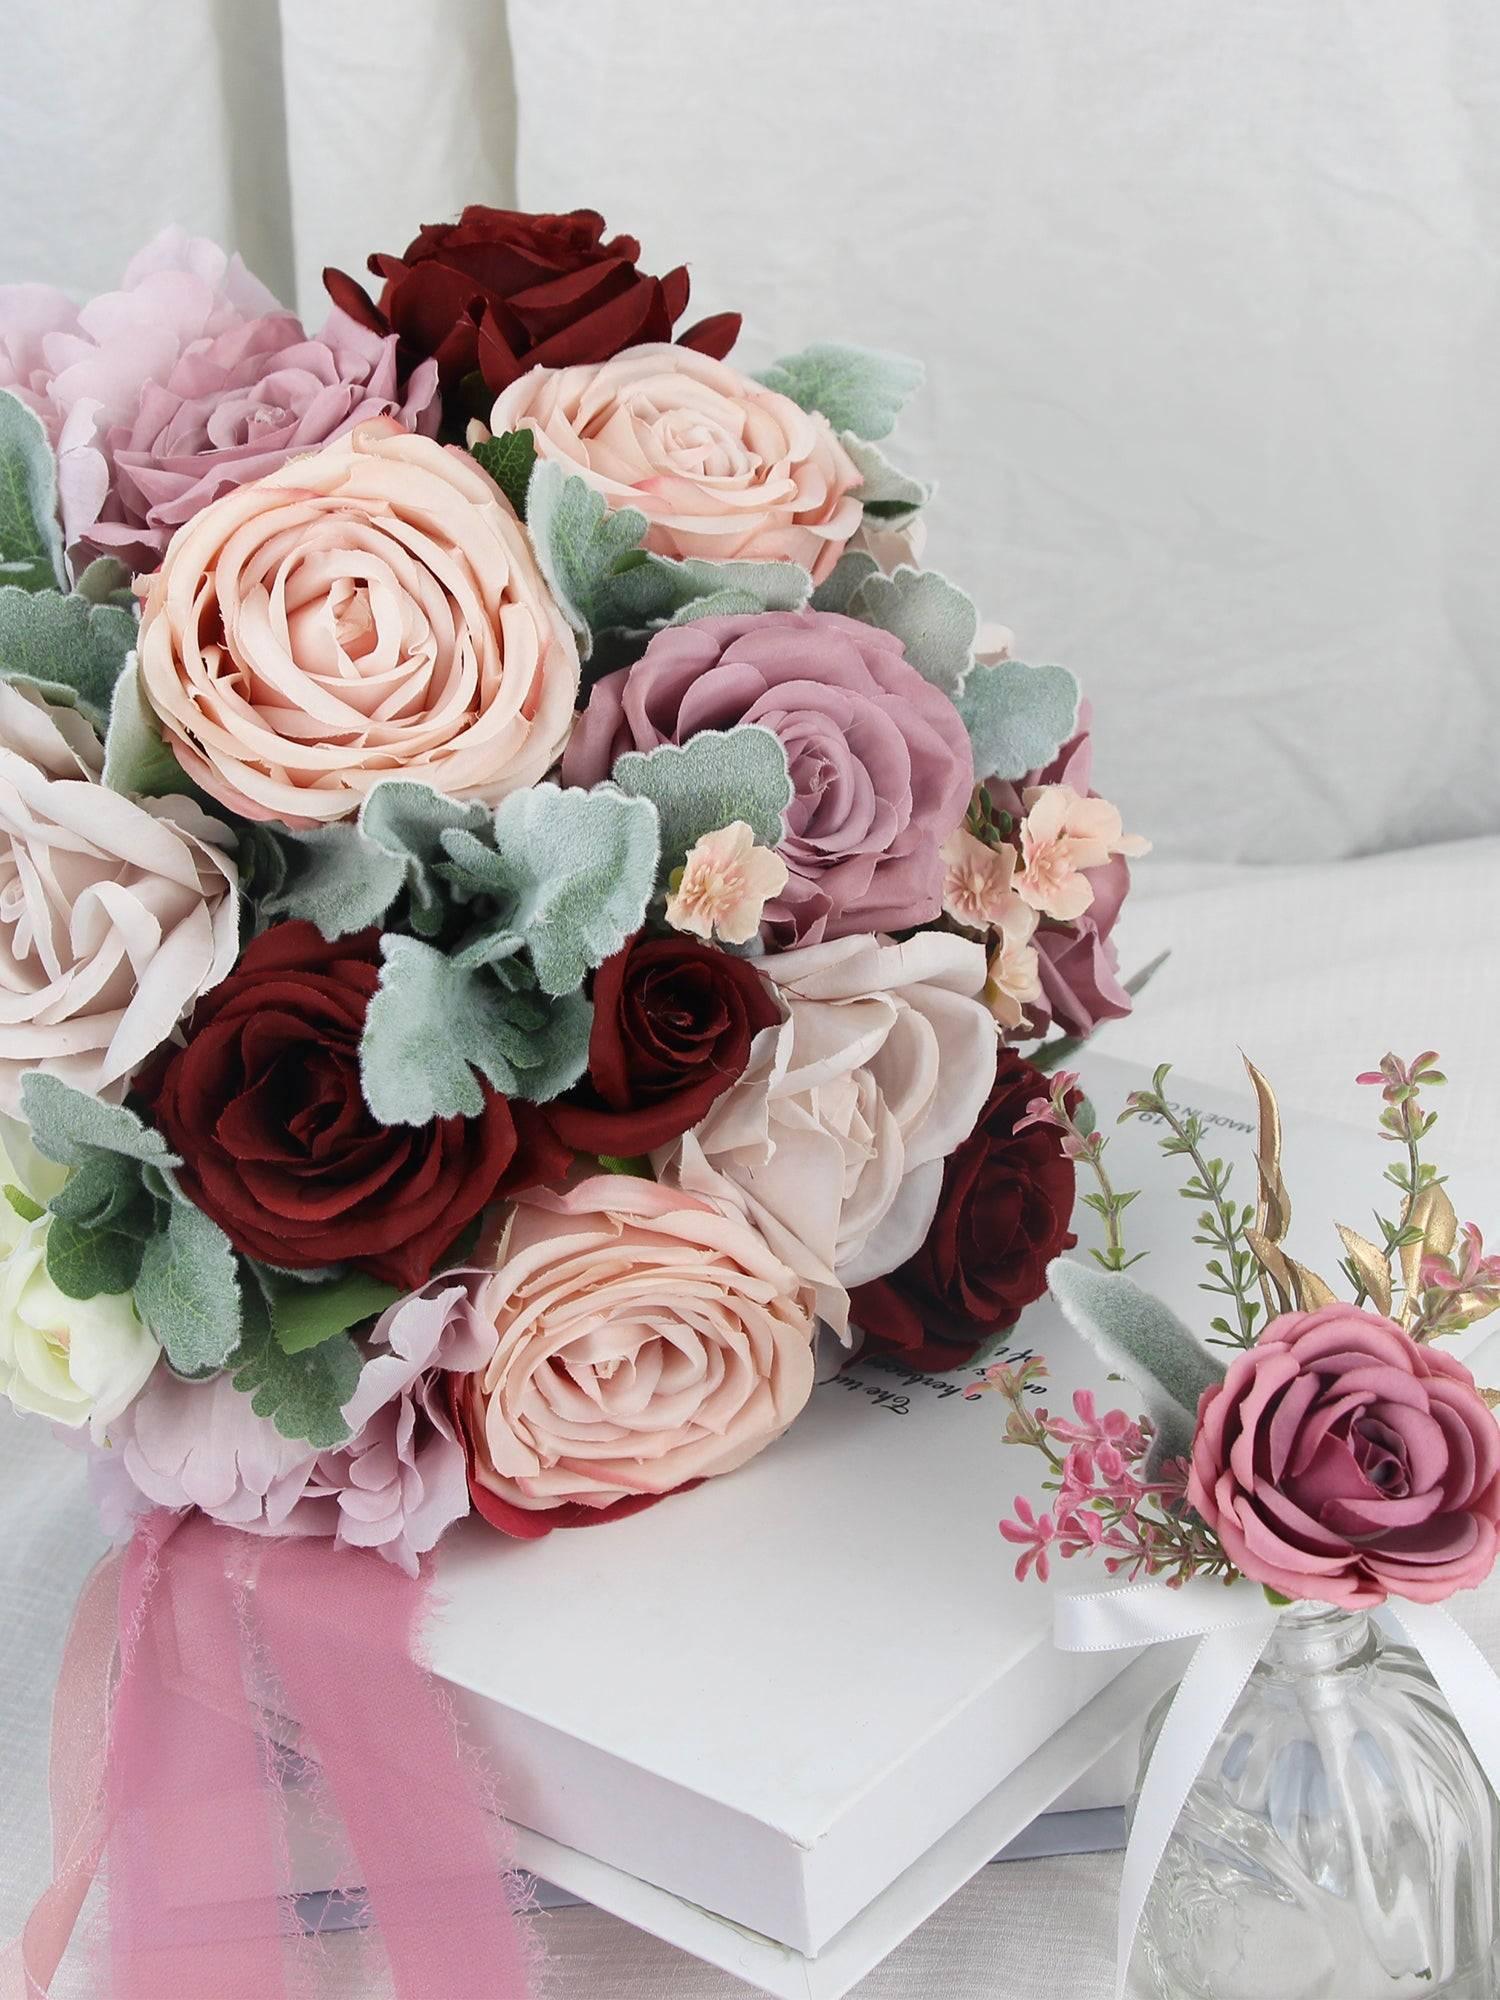 11 inch wide Dusty Rose Rounded Bridal Bouquet - Rinlong Flower